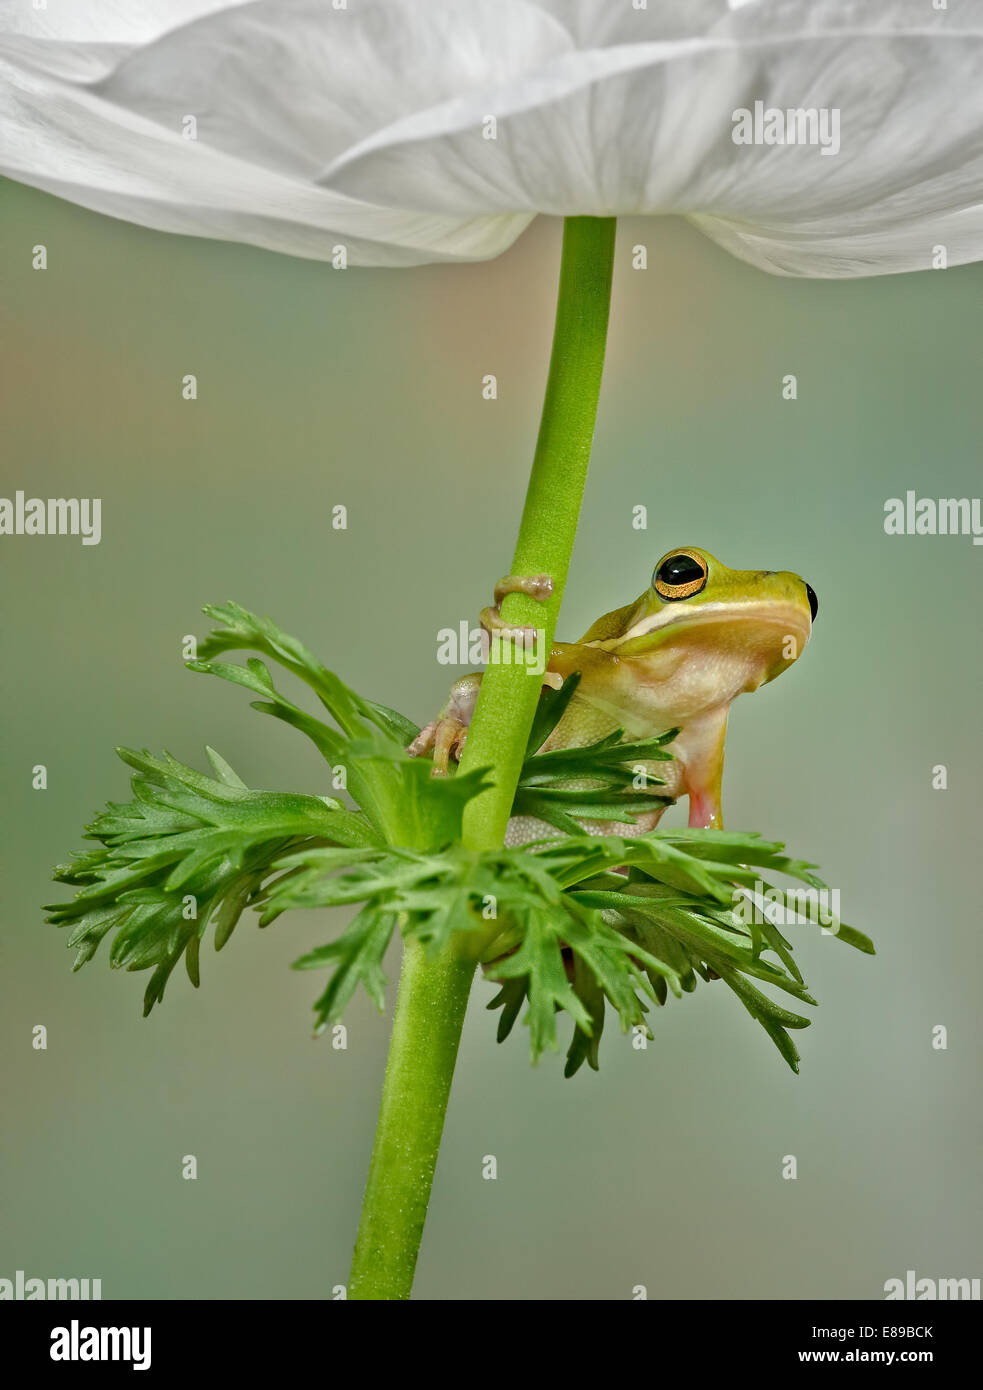 Green Tree Frog sits on leaves below a white flower. The white petals of the flower act as a canopy for this cute little frog. Stock Photo